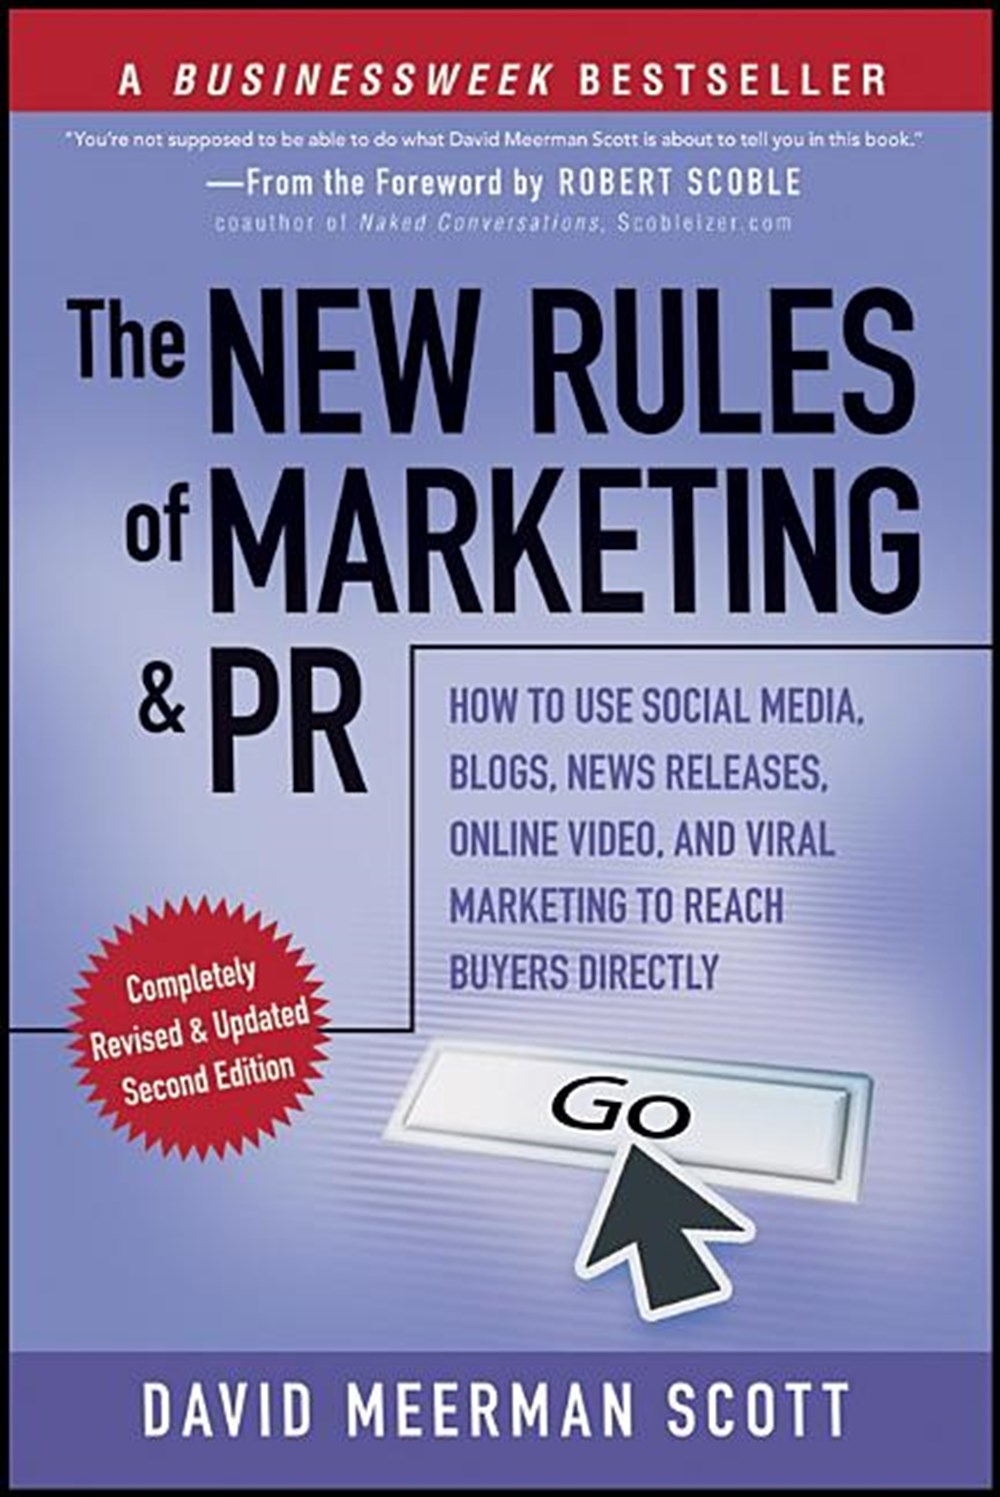 New Rules of Marketing and PR: How to Use Social Media, Blogs, News Releases, Online Video, & Viral 